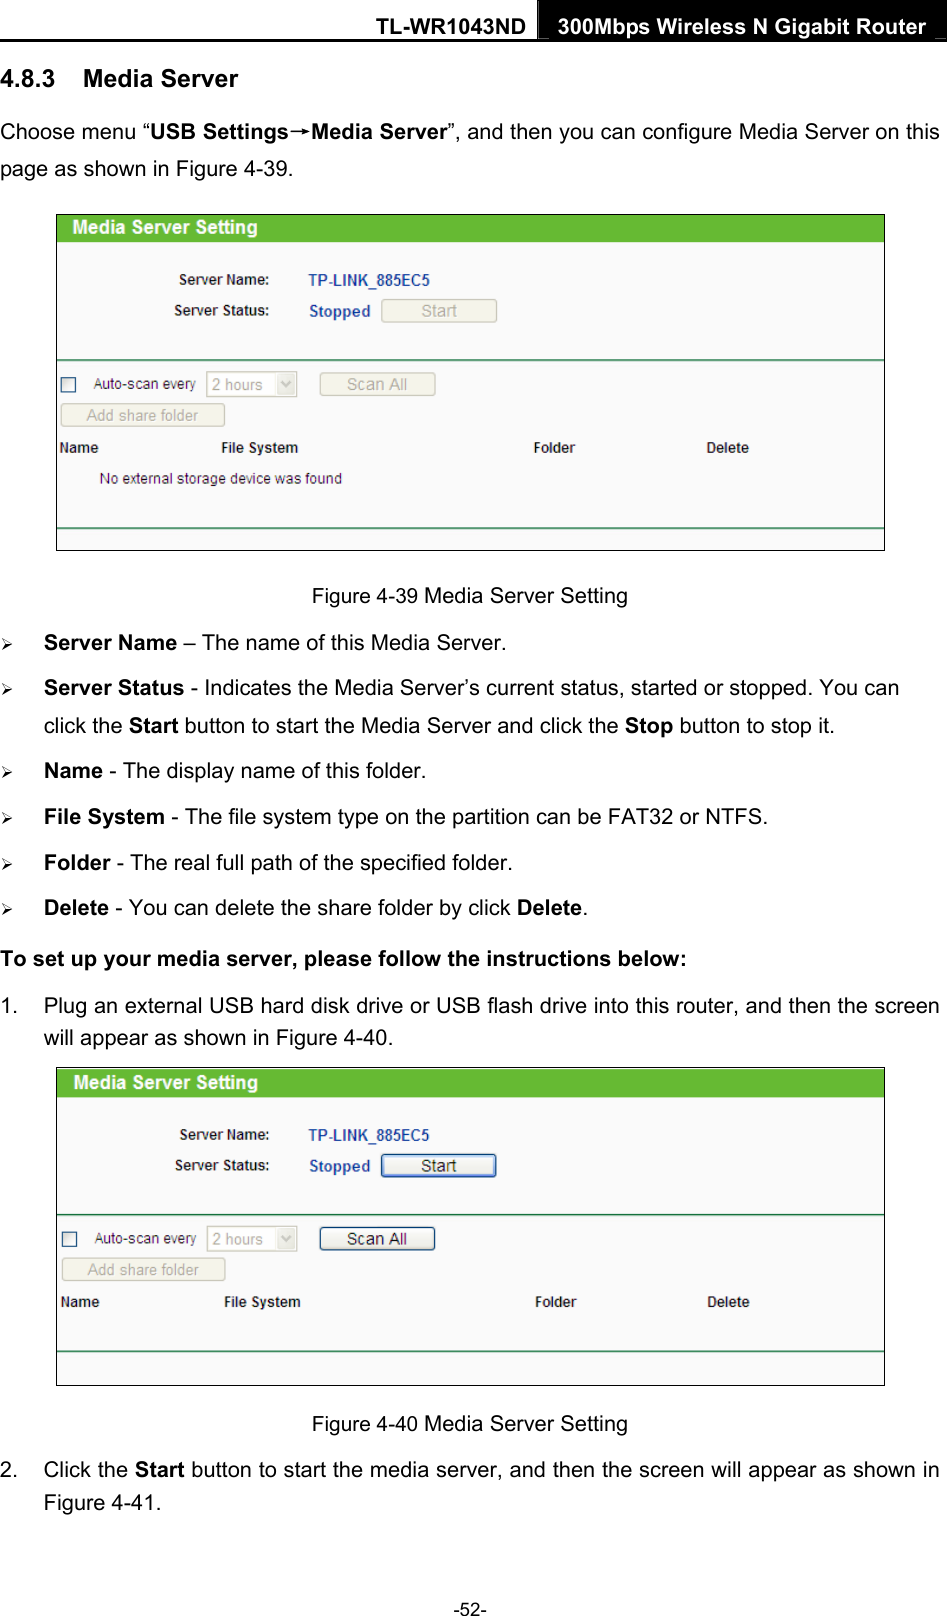 TL-WR1043ND 300Mbps Wireless N Gigabit Router  4.8.3  Media Server Choose menu “USB Settings→Media Server”, and then you can configure Media Server on this page as shown in Figure 4-39.  Figure 4-39 Media Server Setting ¾ Server Name – The name of this Media Server. ¾ Server Status - Indicates the Media Server’s current status, started or stopped. You can click the Start button to start the Media Server and click the Stop button to stop it.     ¾ Name - The display name of this folder.   ¾ File System - The file system type on the partition can be FAT32 or NTFS.   ¾ Folder - The real full path of the specified folder.   ¾ Delete - You can delete the share folder by click Delete. To set up your media server, please follow the instructions below:   1.  Plug an external USB hard disk drive or USB flash drive into this router, and then the screen will appear as shown in Figure 4-40.  Figure 4-40 Media Server Setting 2. Click the Start button to start the media server, and then the screen will appear as shown in Figure 4-41. -52- 